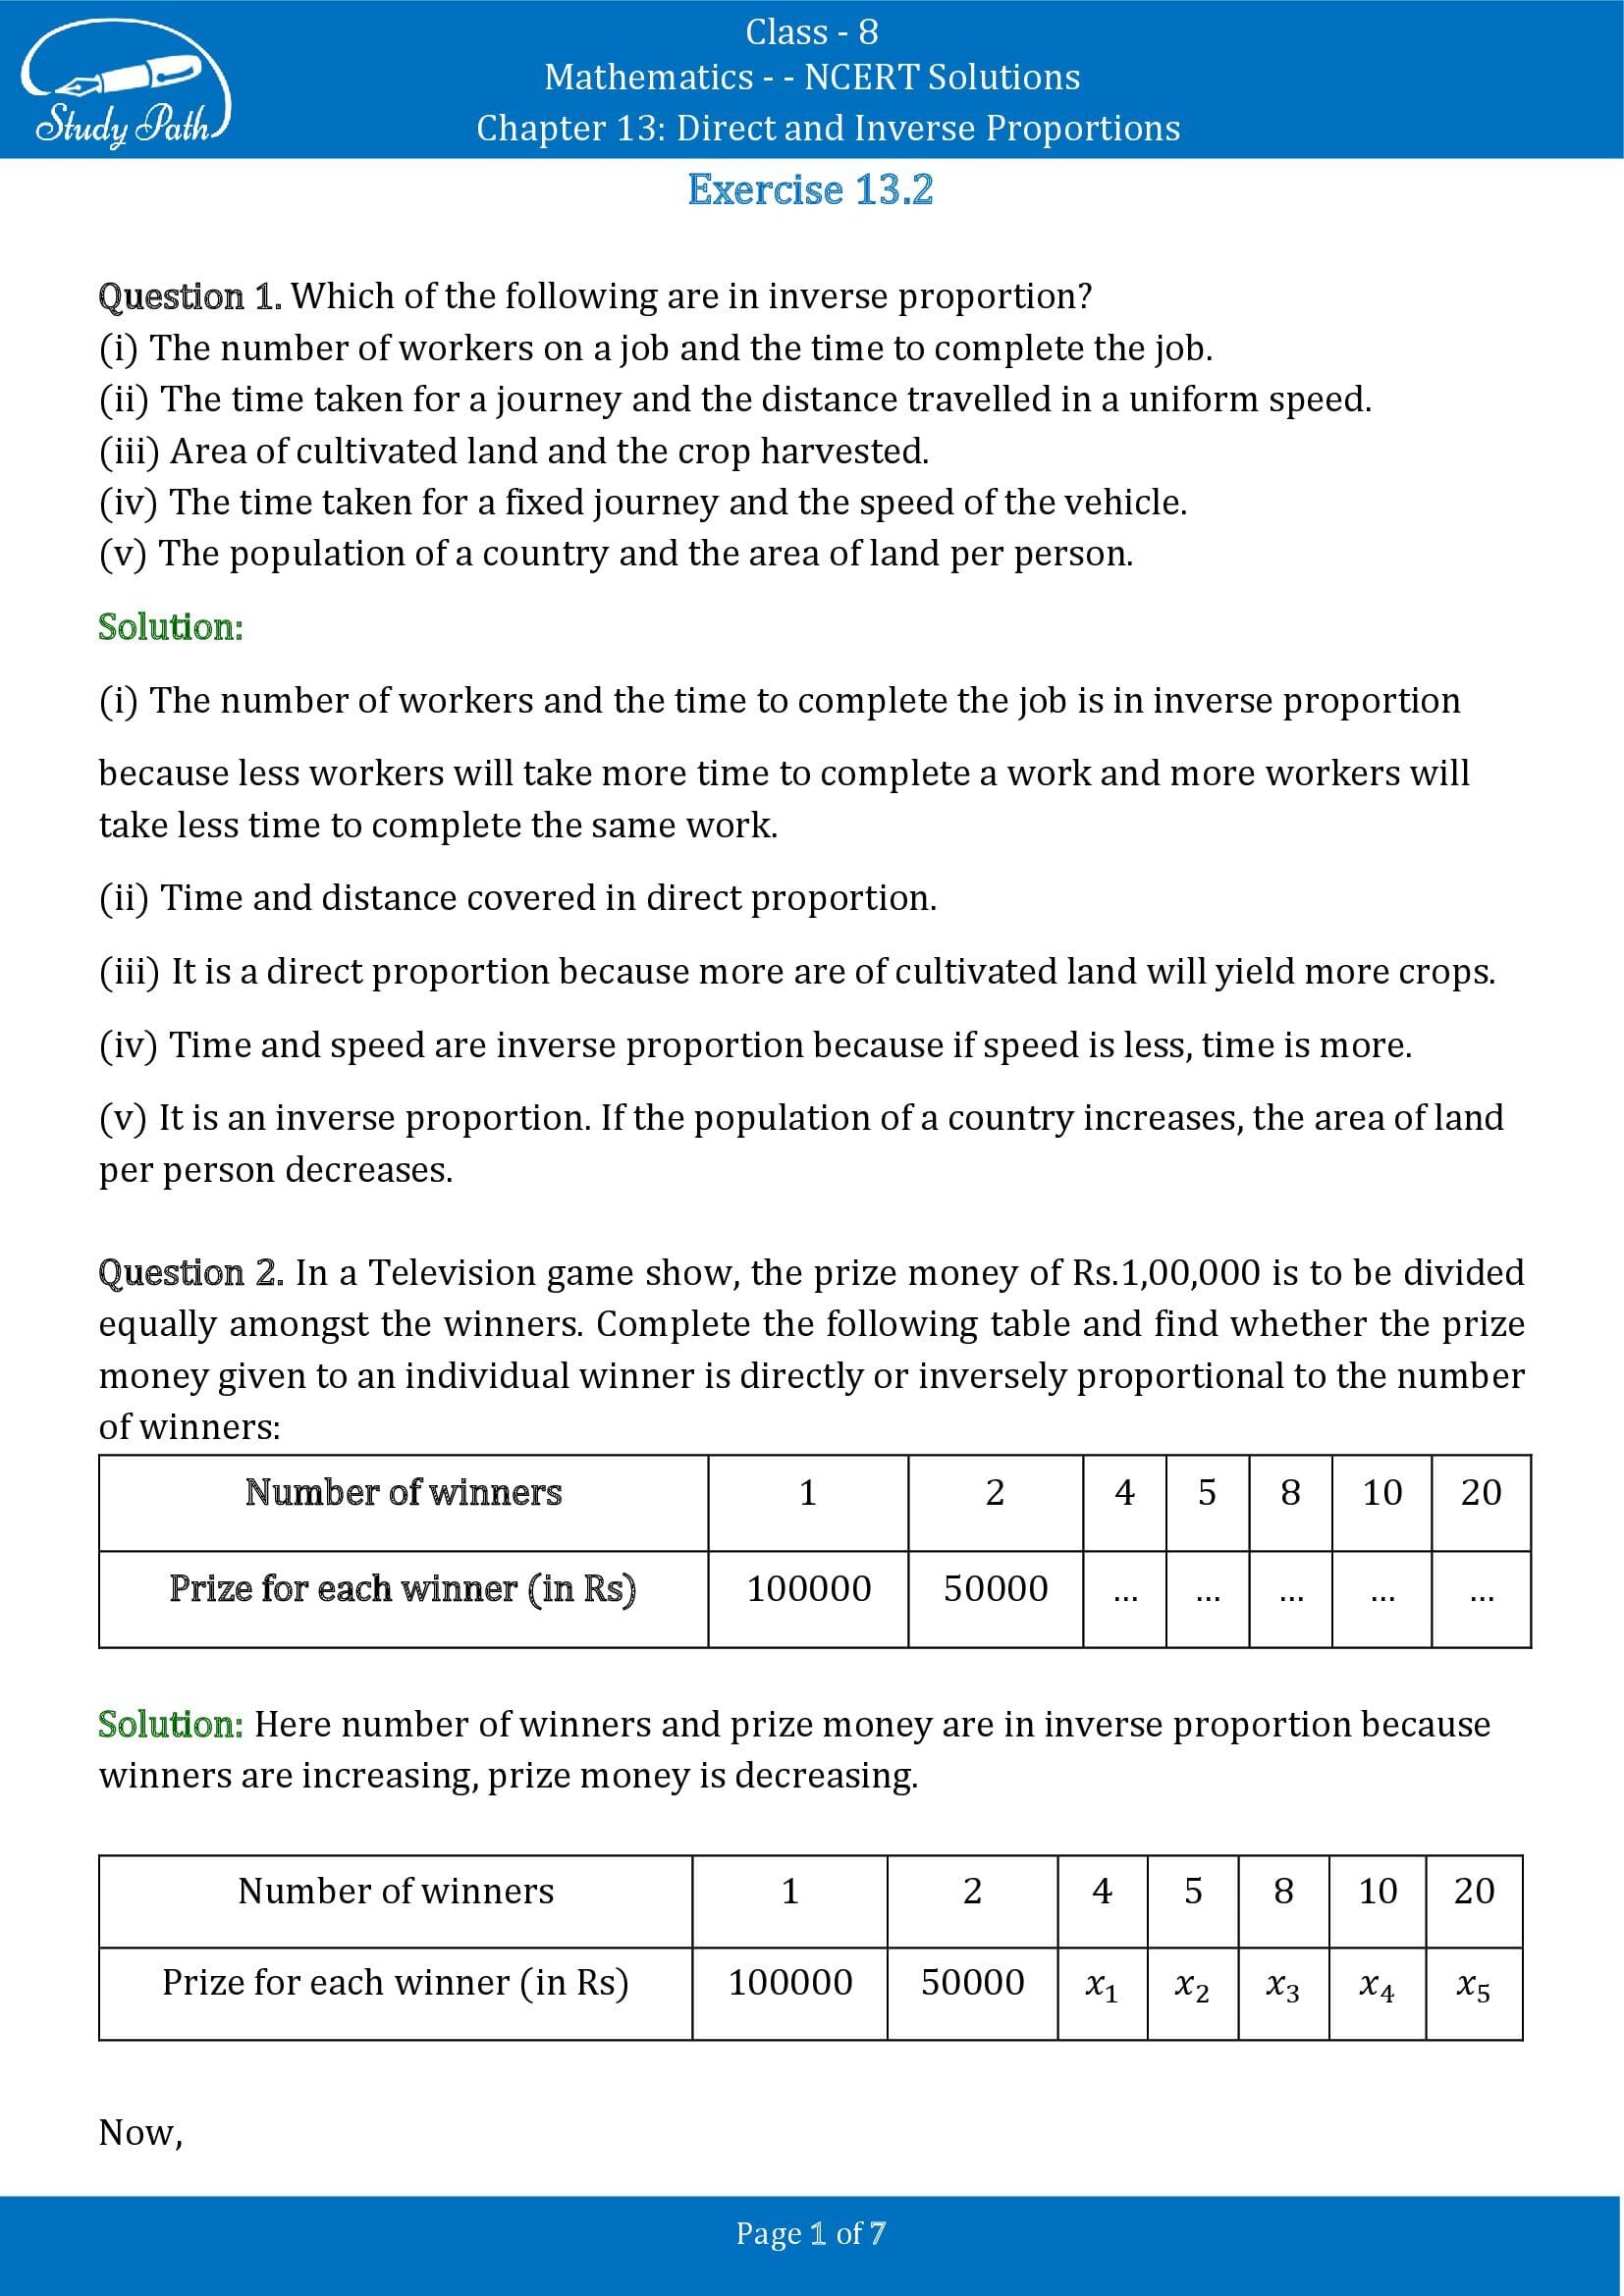 NCERT Solutions for Class 8 Maths Chapter 13 Direct and Inverse Proportions Exercise 13.2 00001